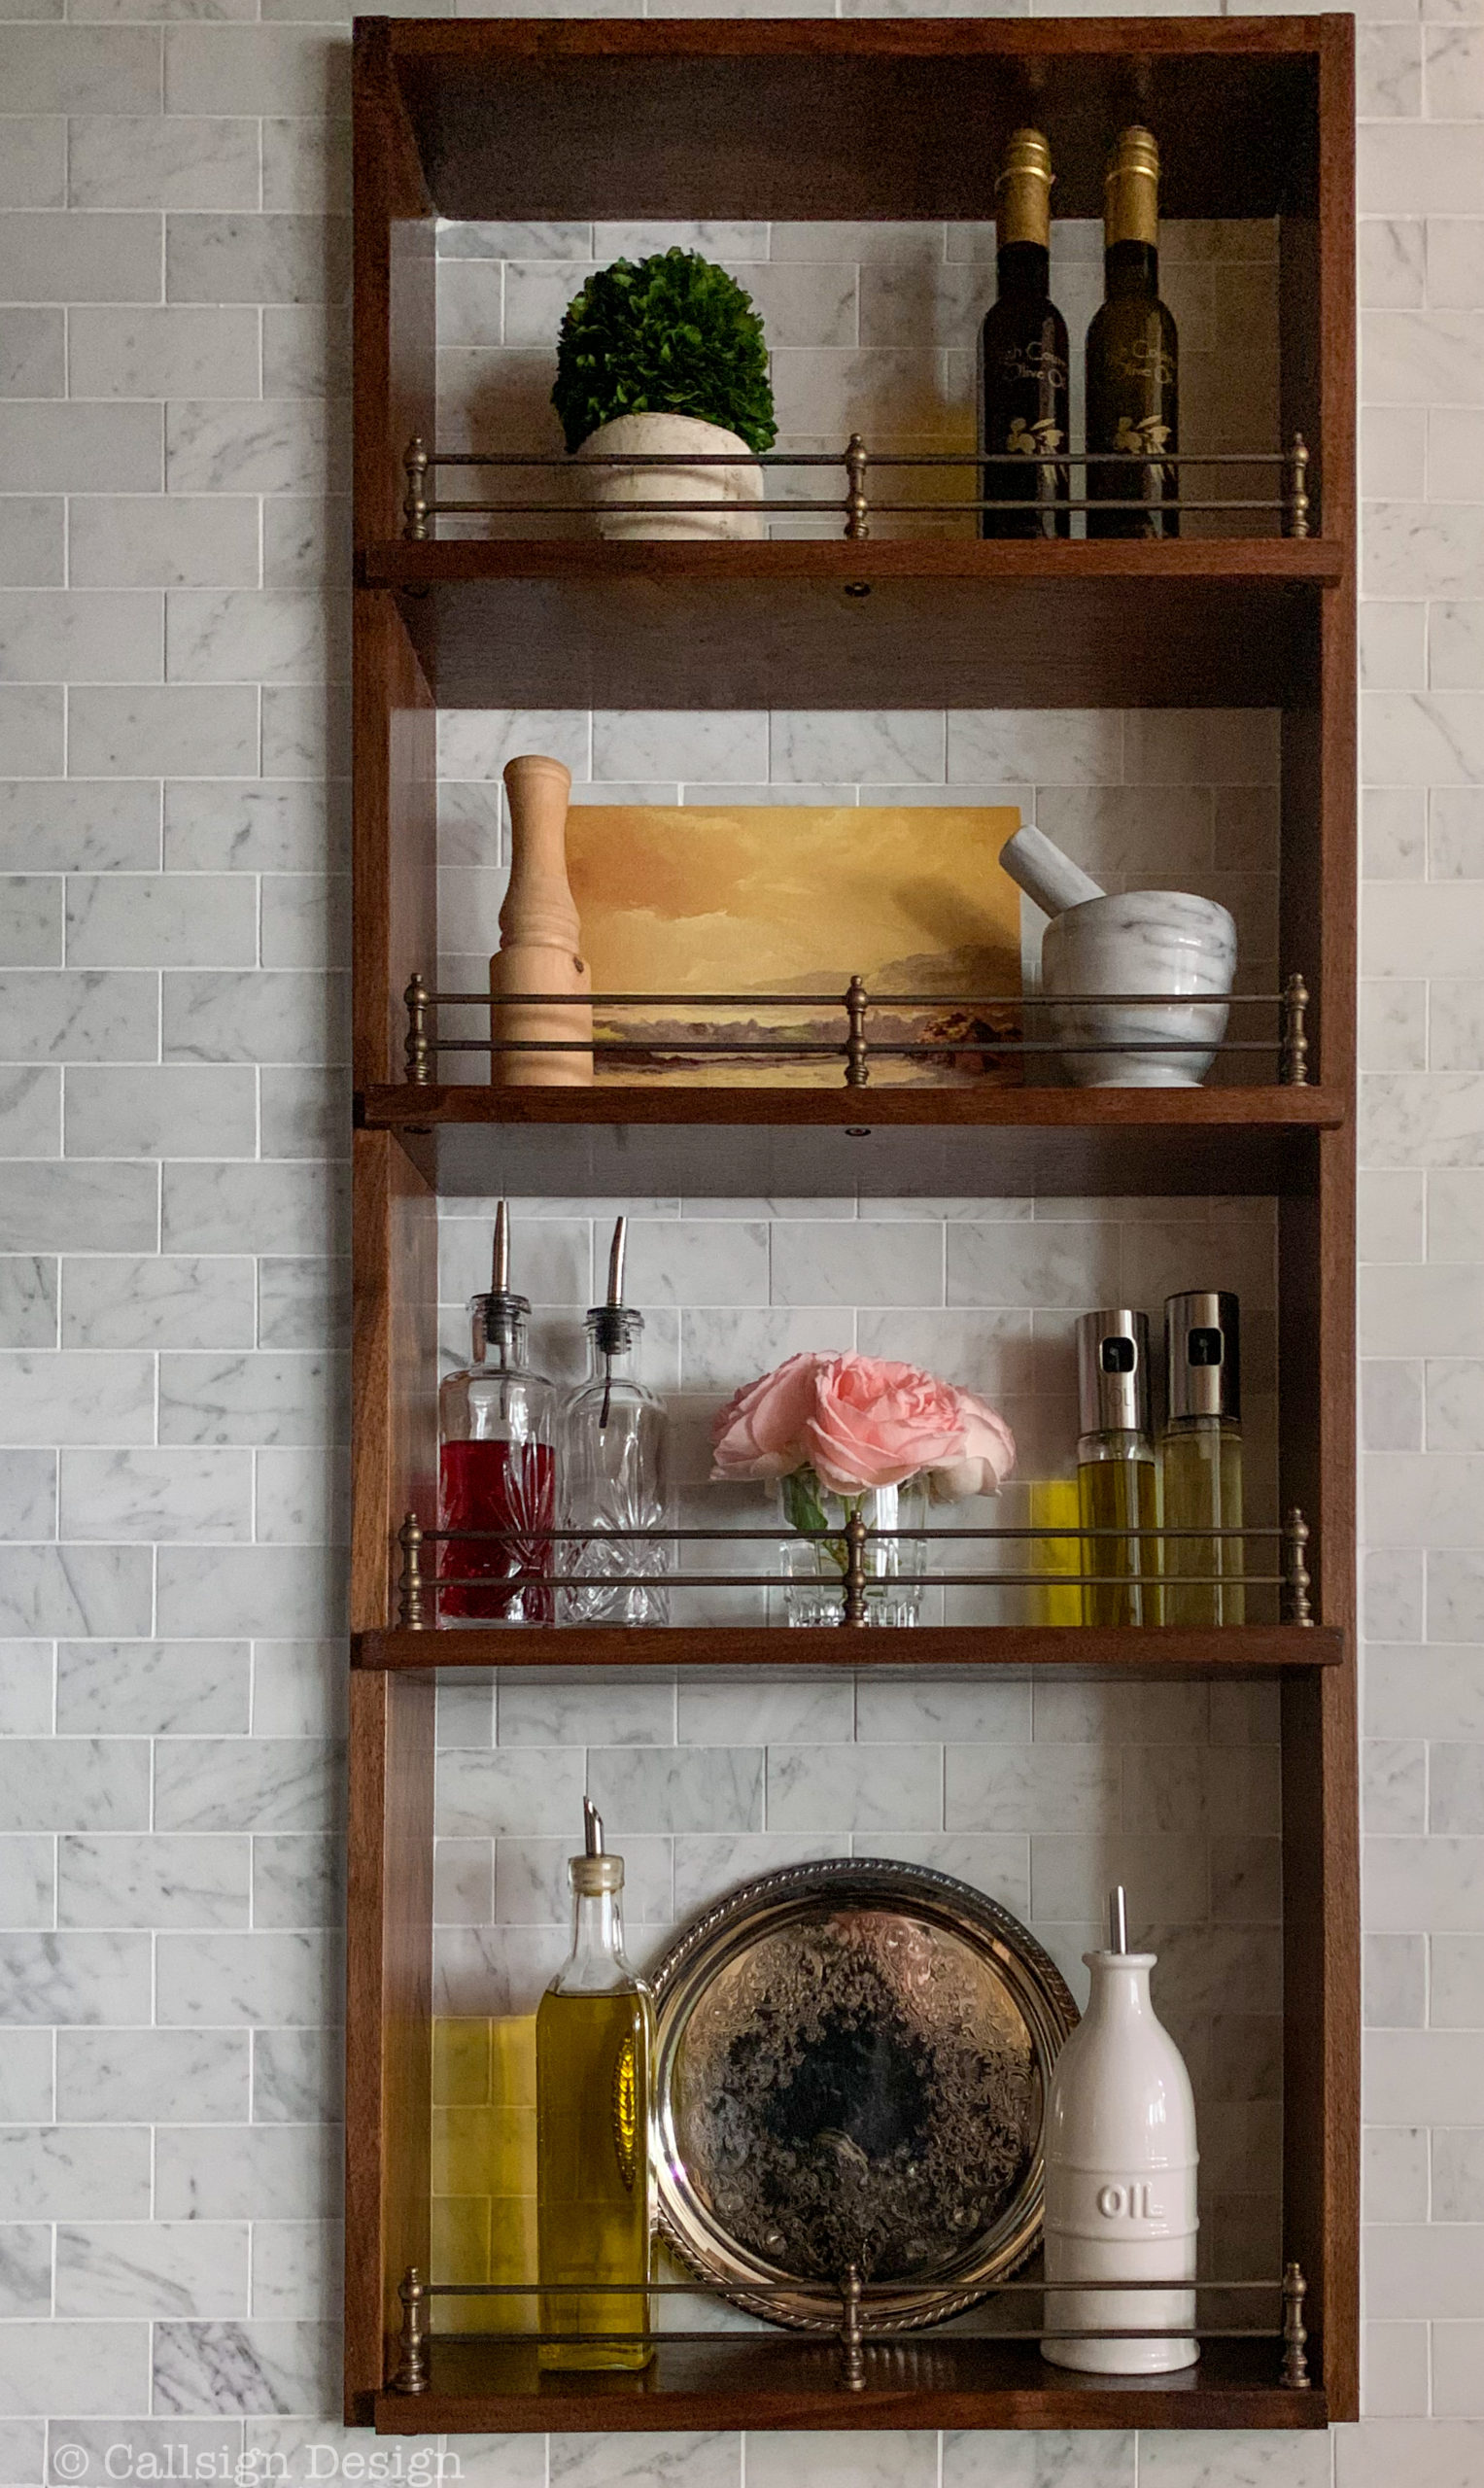 The Oil and Spice Shelf Nook Inside Your Range Hood Surround You Didn't Know You Needed But You Absolutely Must Have: Styled shelfie all ready to go with a small preserved boxwood, oils from High Country Olive Oil, a carrara marble mortar and pestle, a vintage landscape oil painting, oil carafes/dispensers, and a tiny votif of roses from our last bloom of the season